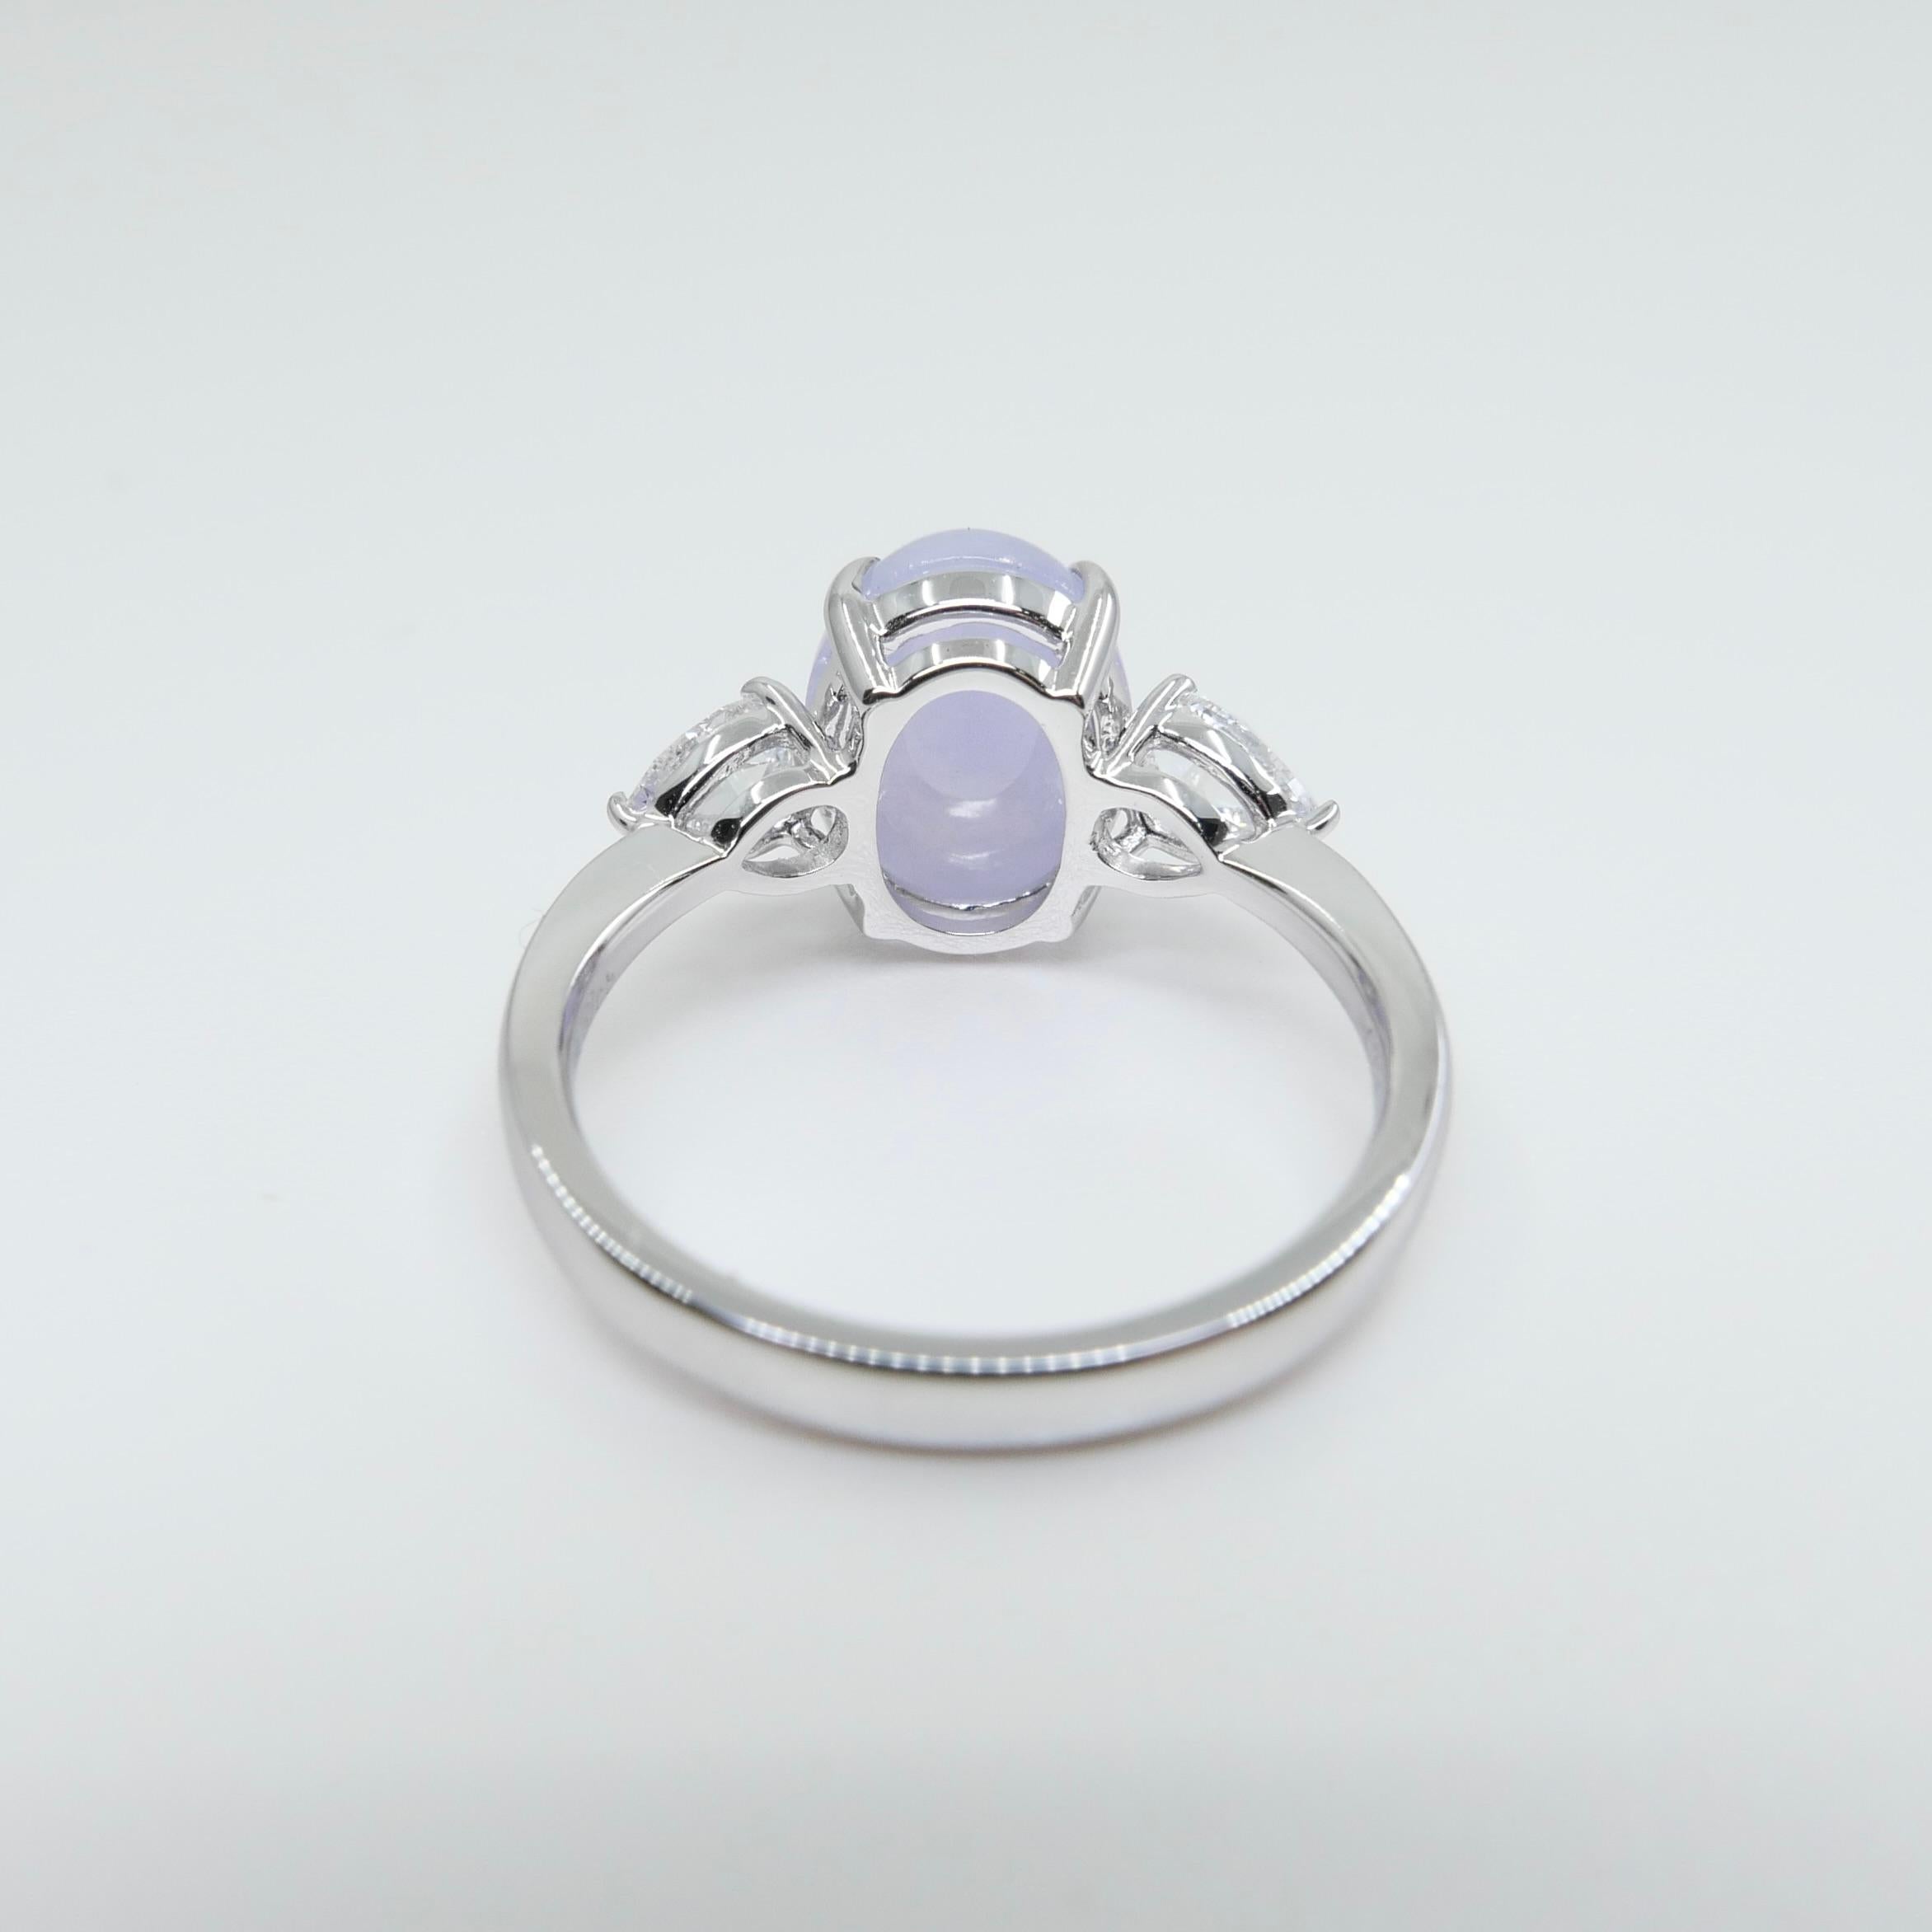 Certified 4.01 Carats Lavender Jade & Rose Cut Pear Shaped Diamond 3 Stone Ring For Sale 1